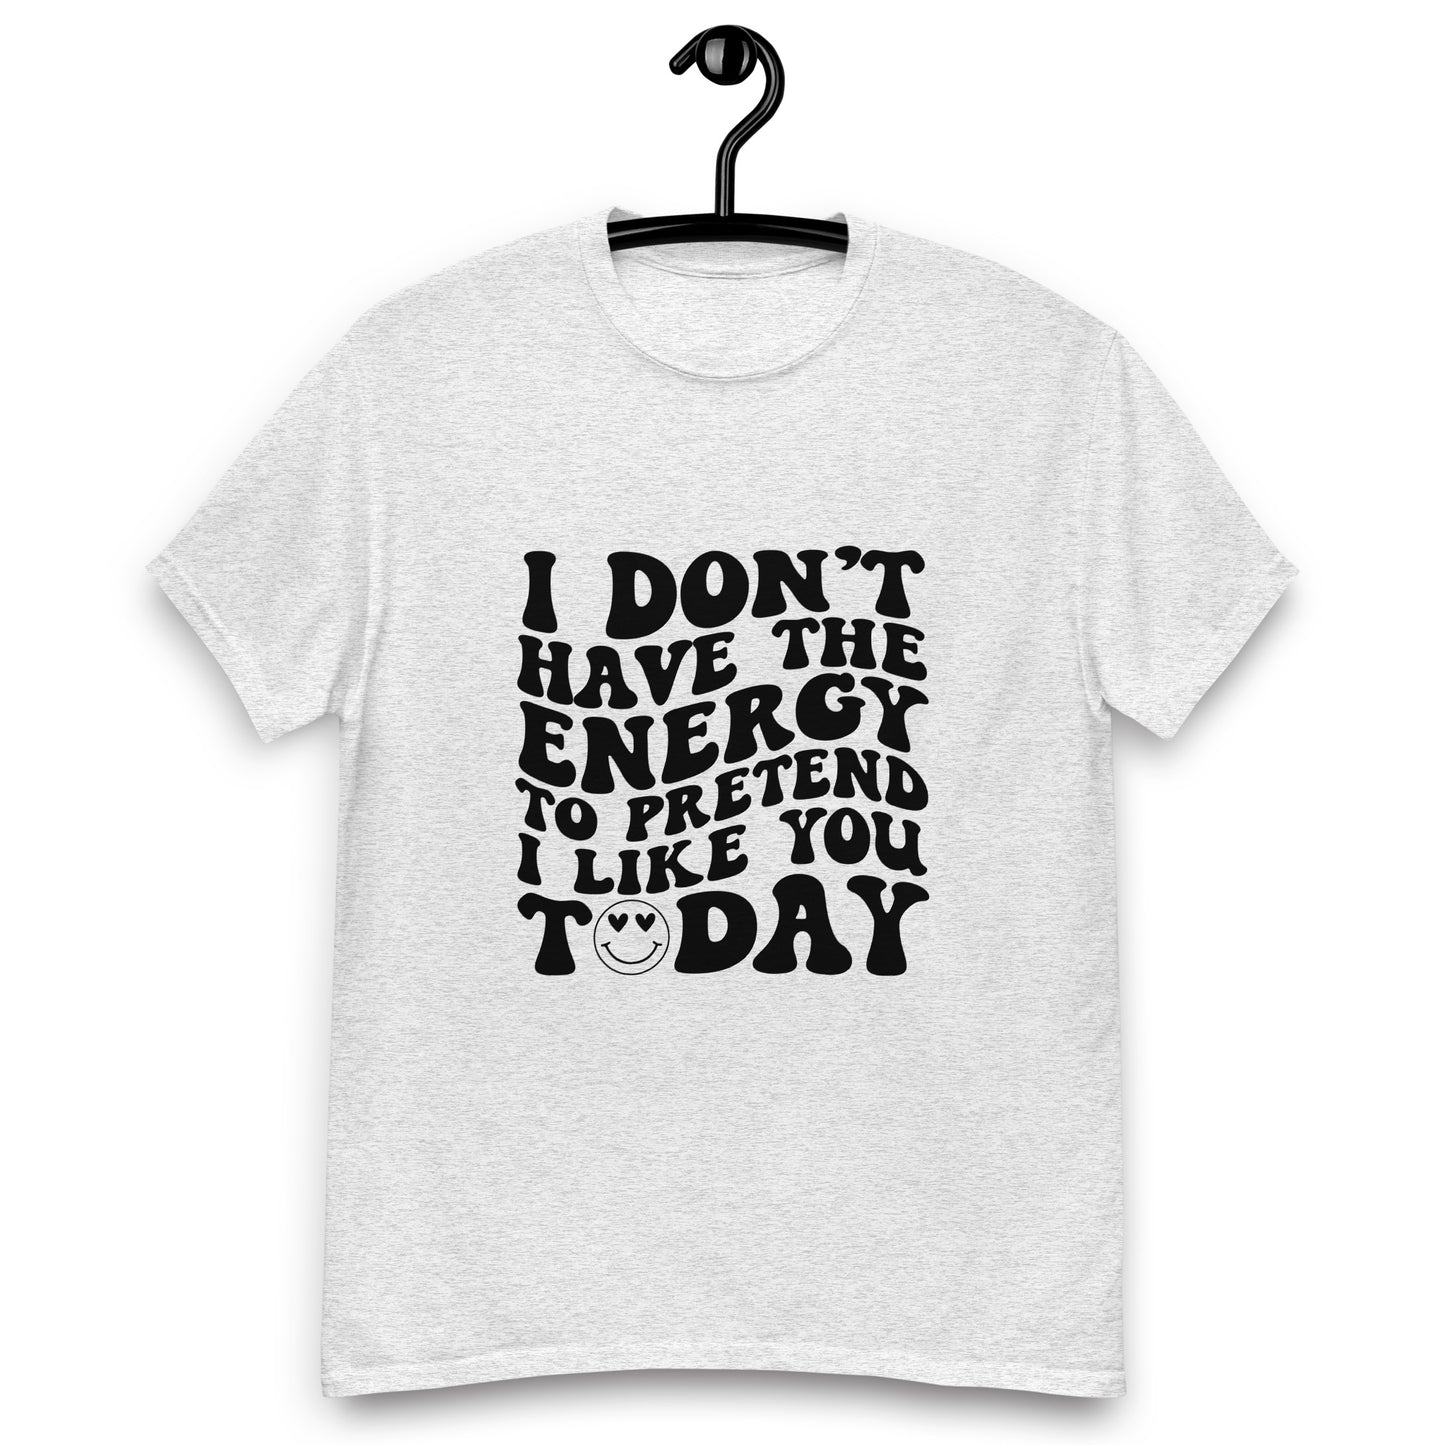 I don't have the energy classic t-shirt